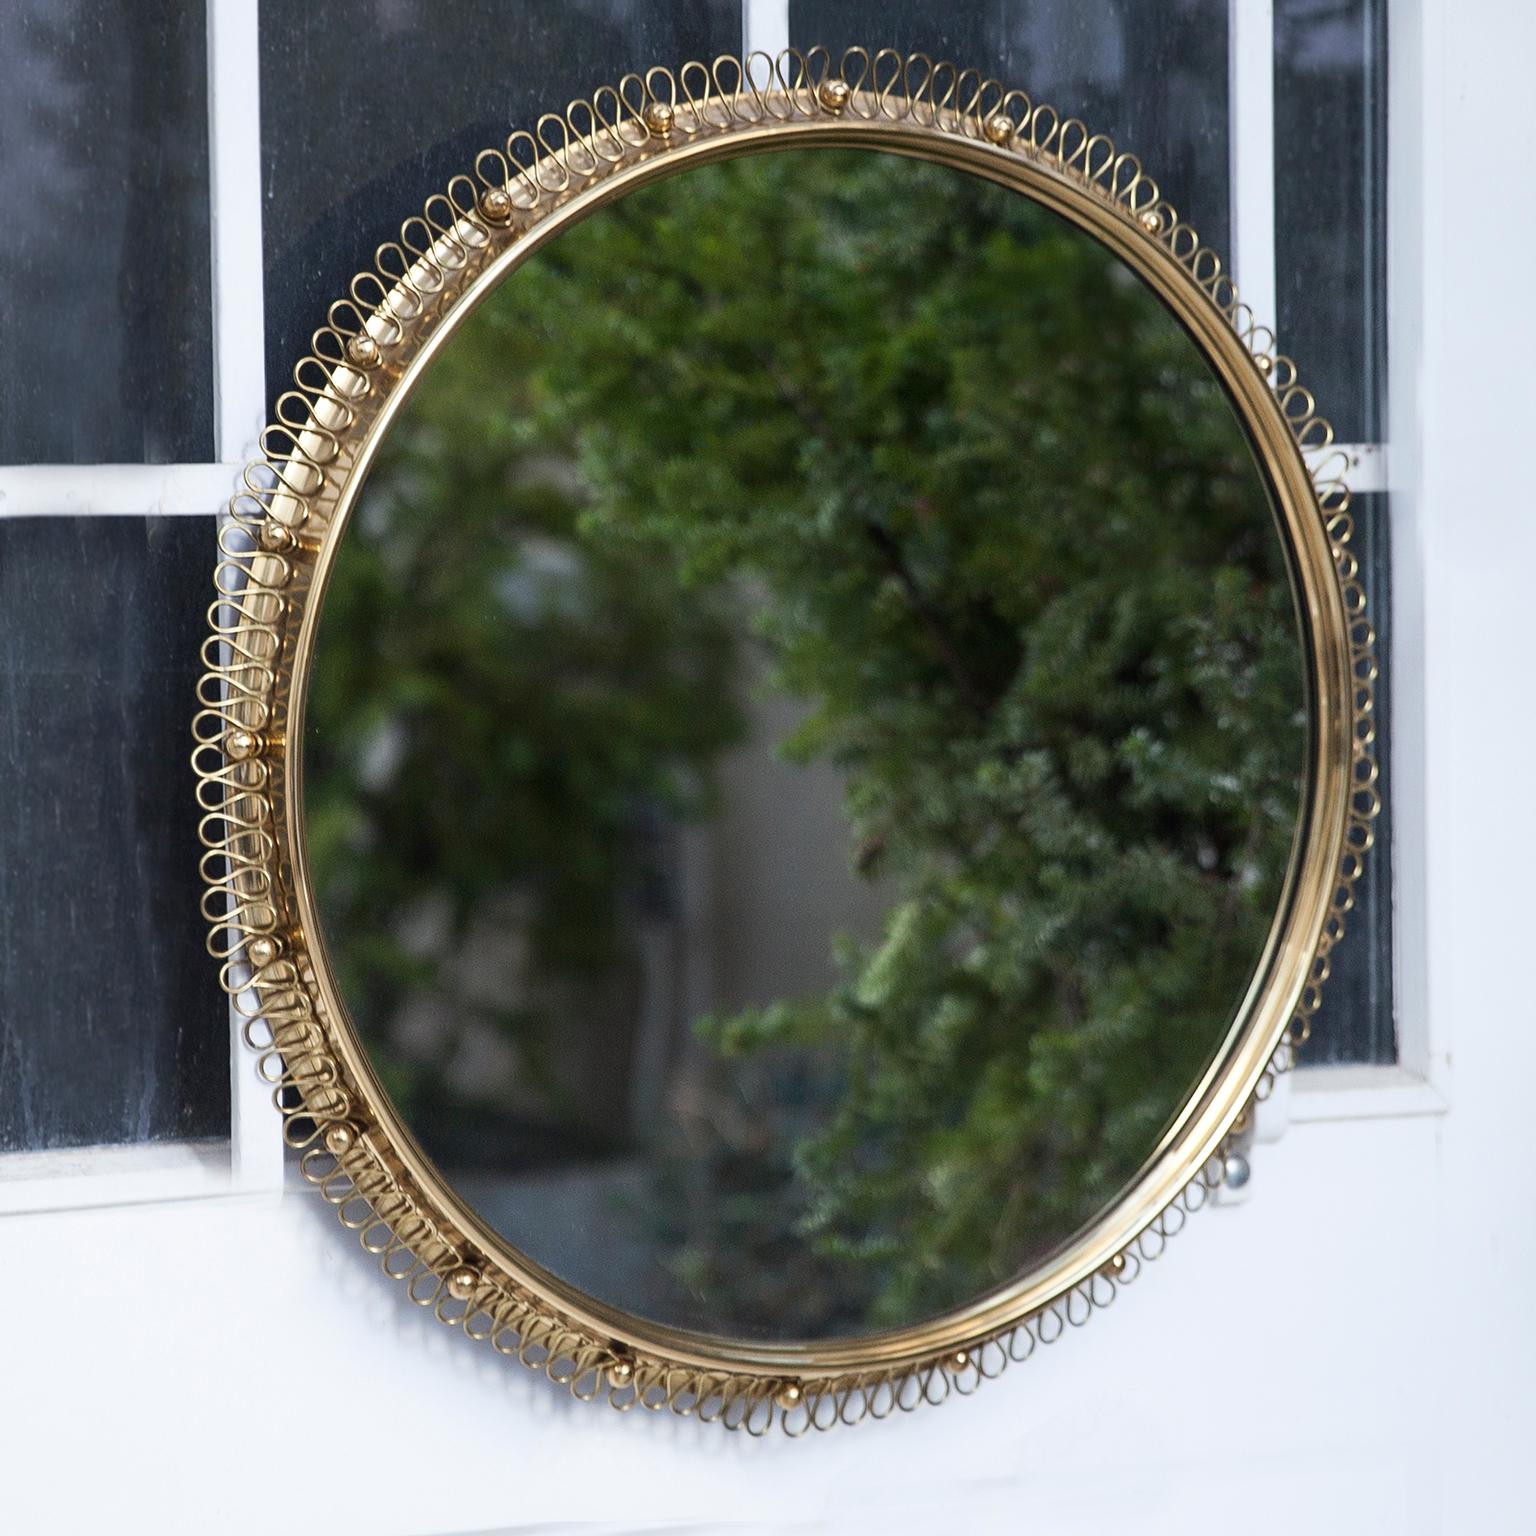 A beautiful mirror with a nice brass loop frame and a decorative brass ring from the 1950s. Designed by Josef Frank for Svenskt Tenn, Sweden.